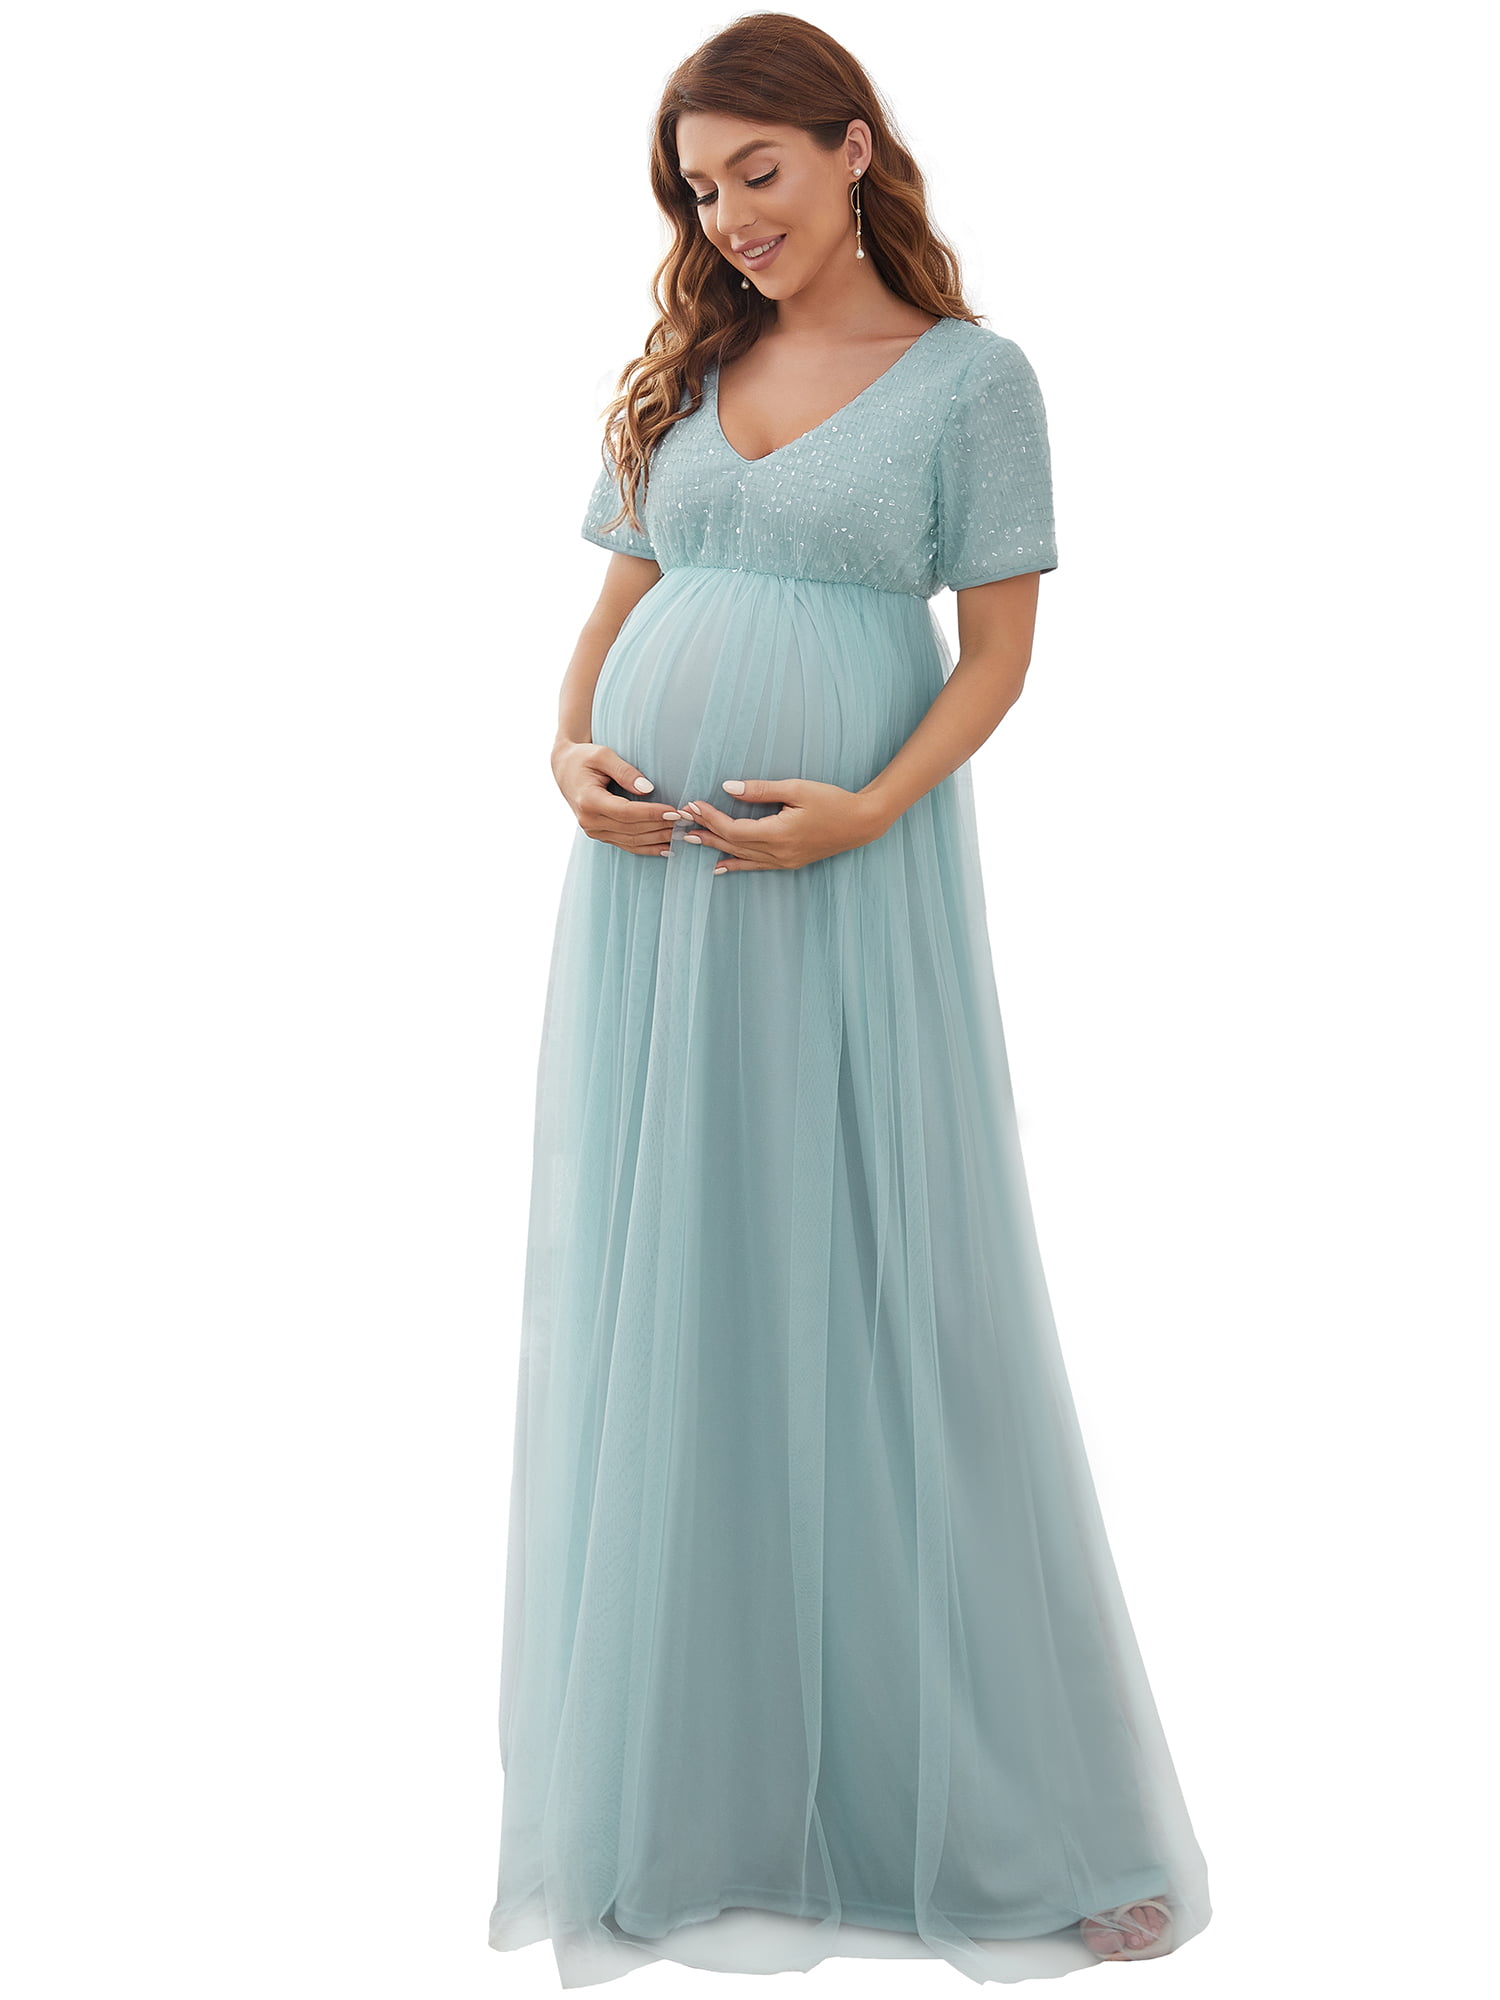 Women Button Maternity Dresses Short Sleeve Swing Mini Dresses for Daily Wearing and Baby Shower